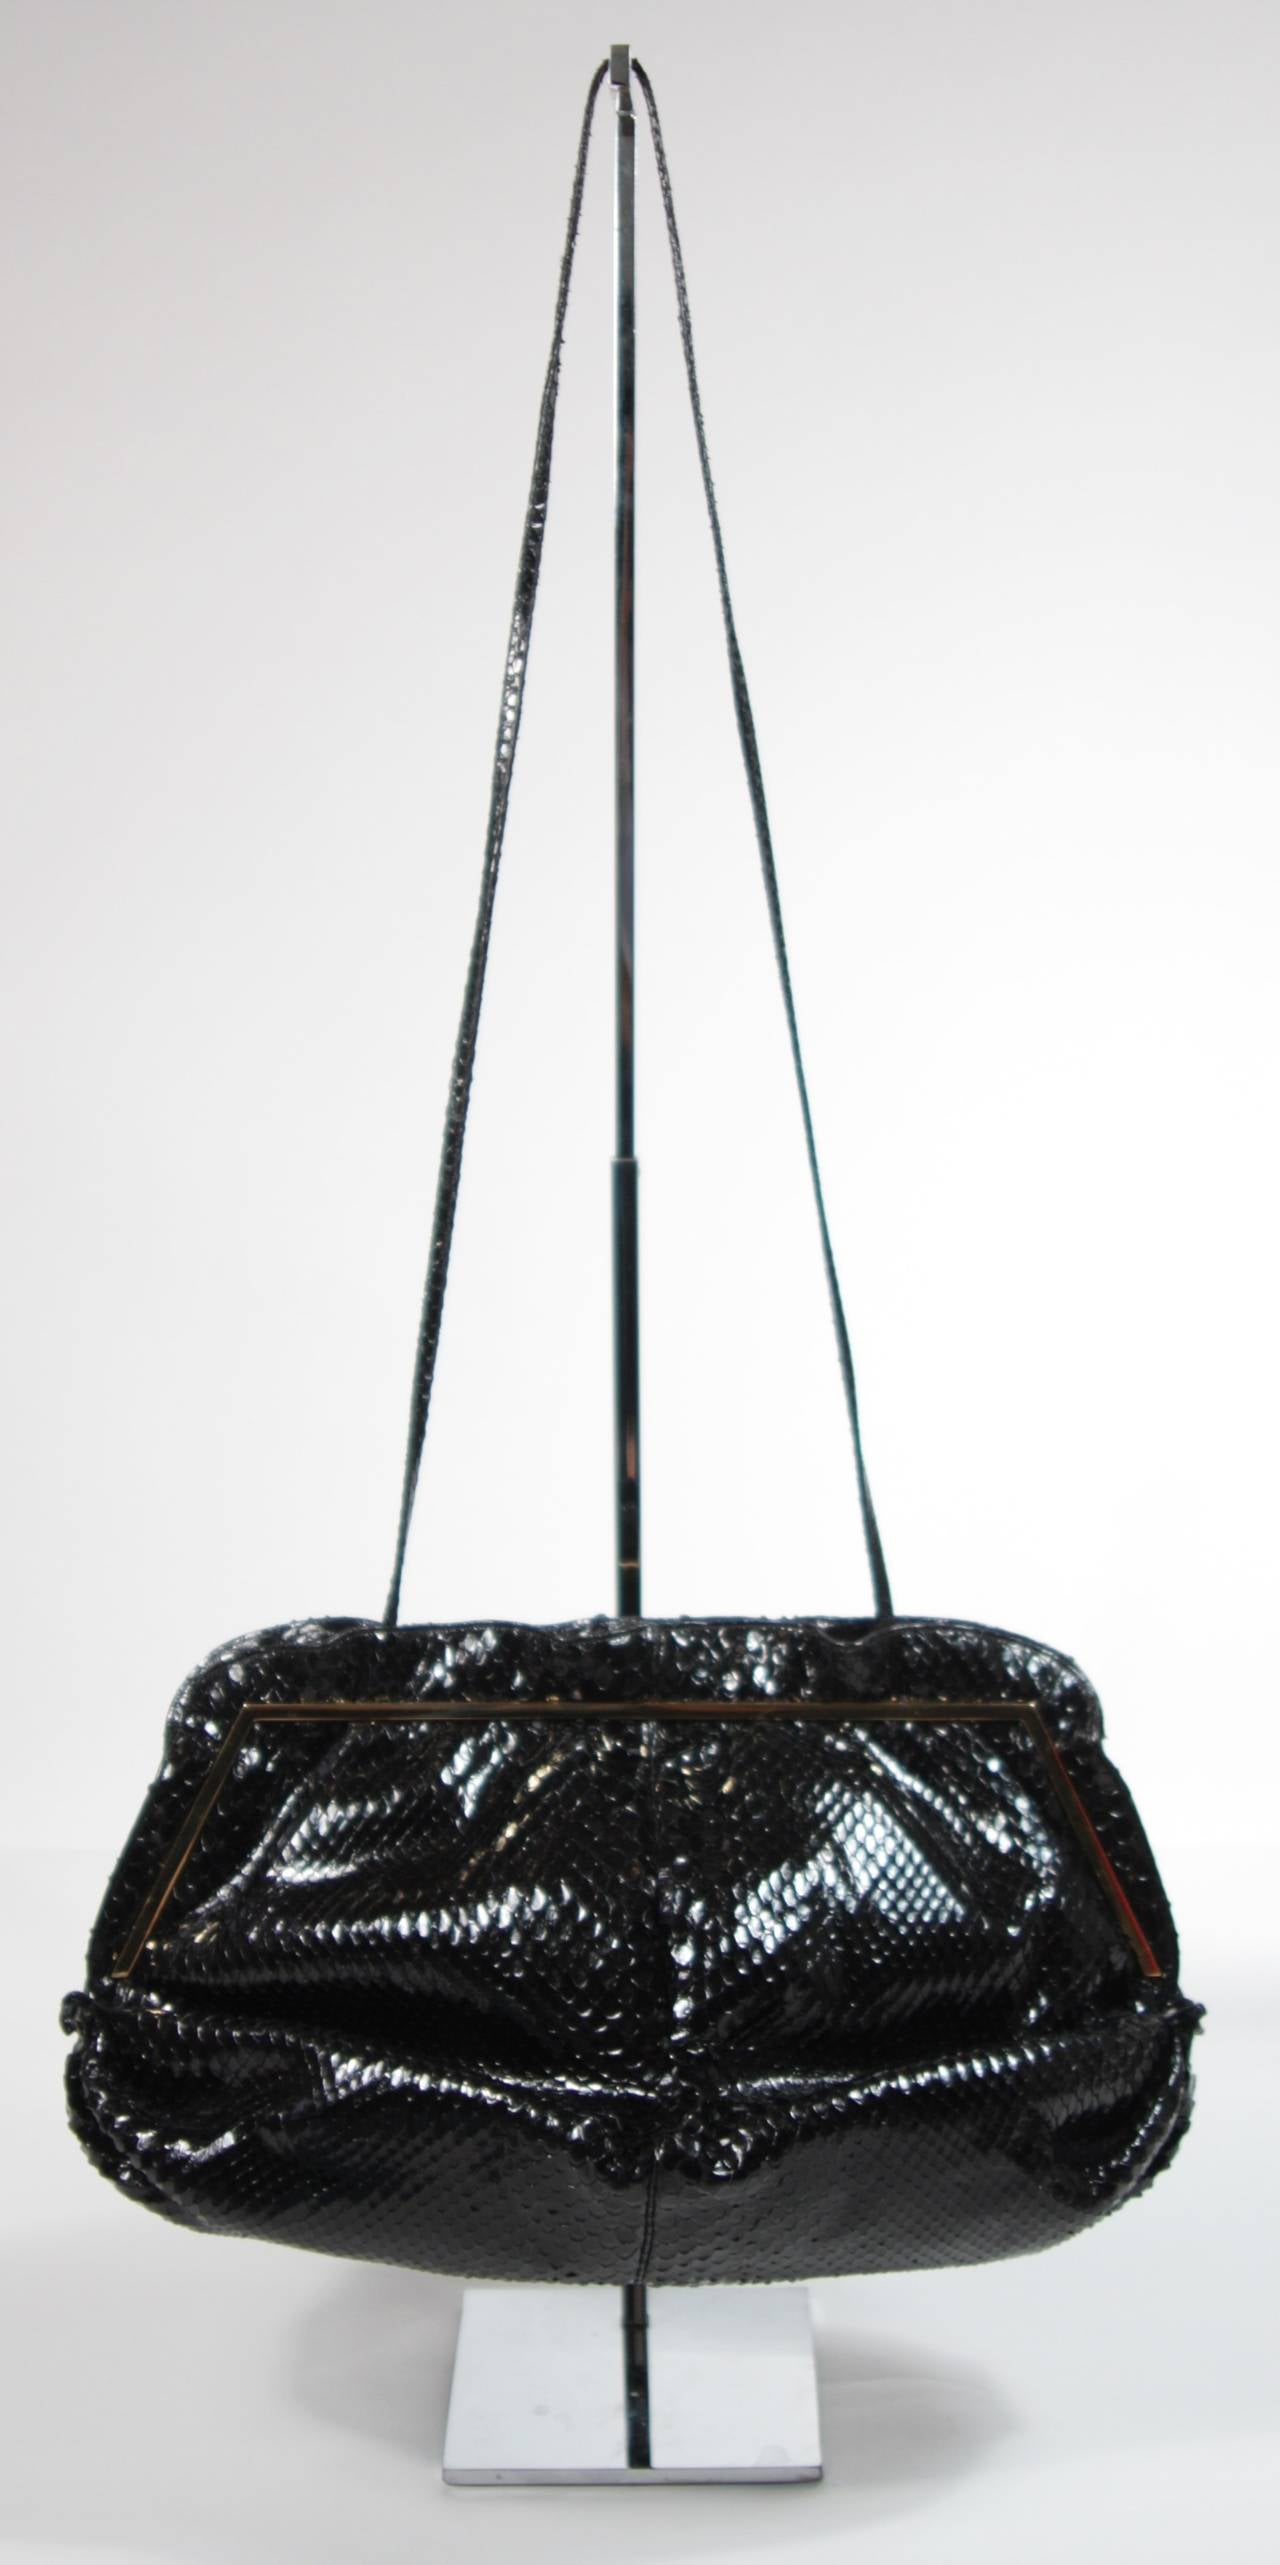 This vintage Judith Leiber is available for viewing at our Beverly Hills Boutique. We offer a large selection of evening gowns and luxury garments.

This handbag is composed of a striking black snakeskin with gold hardware. In excellent condition;